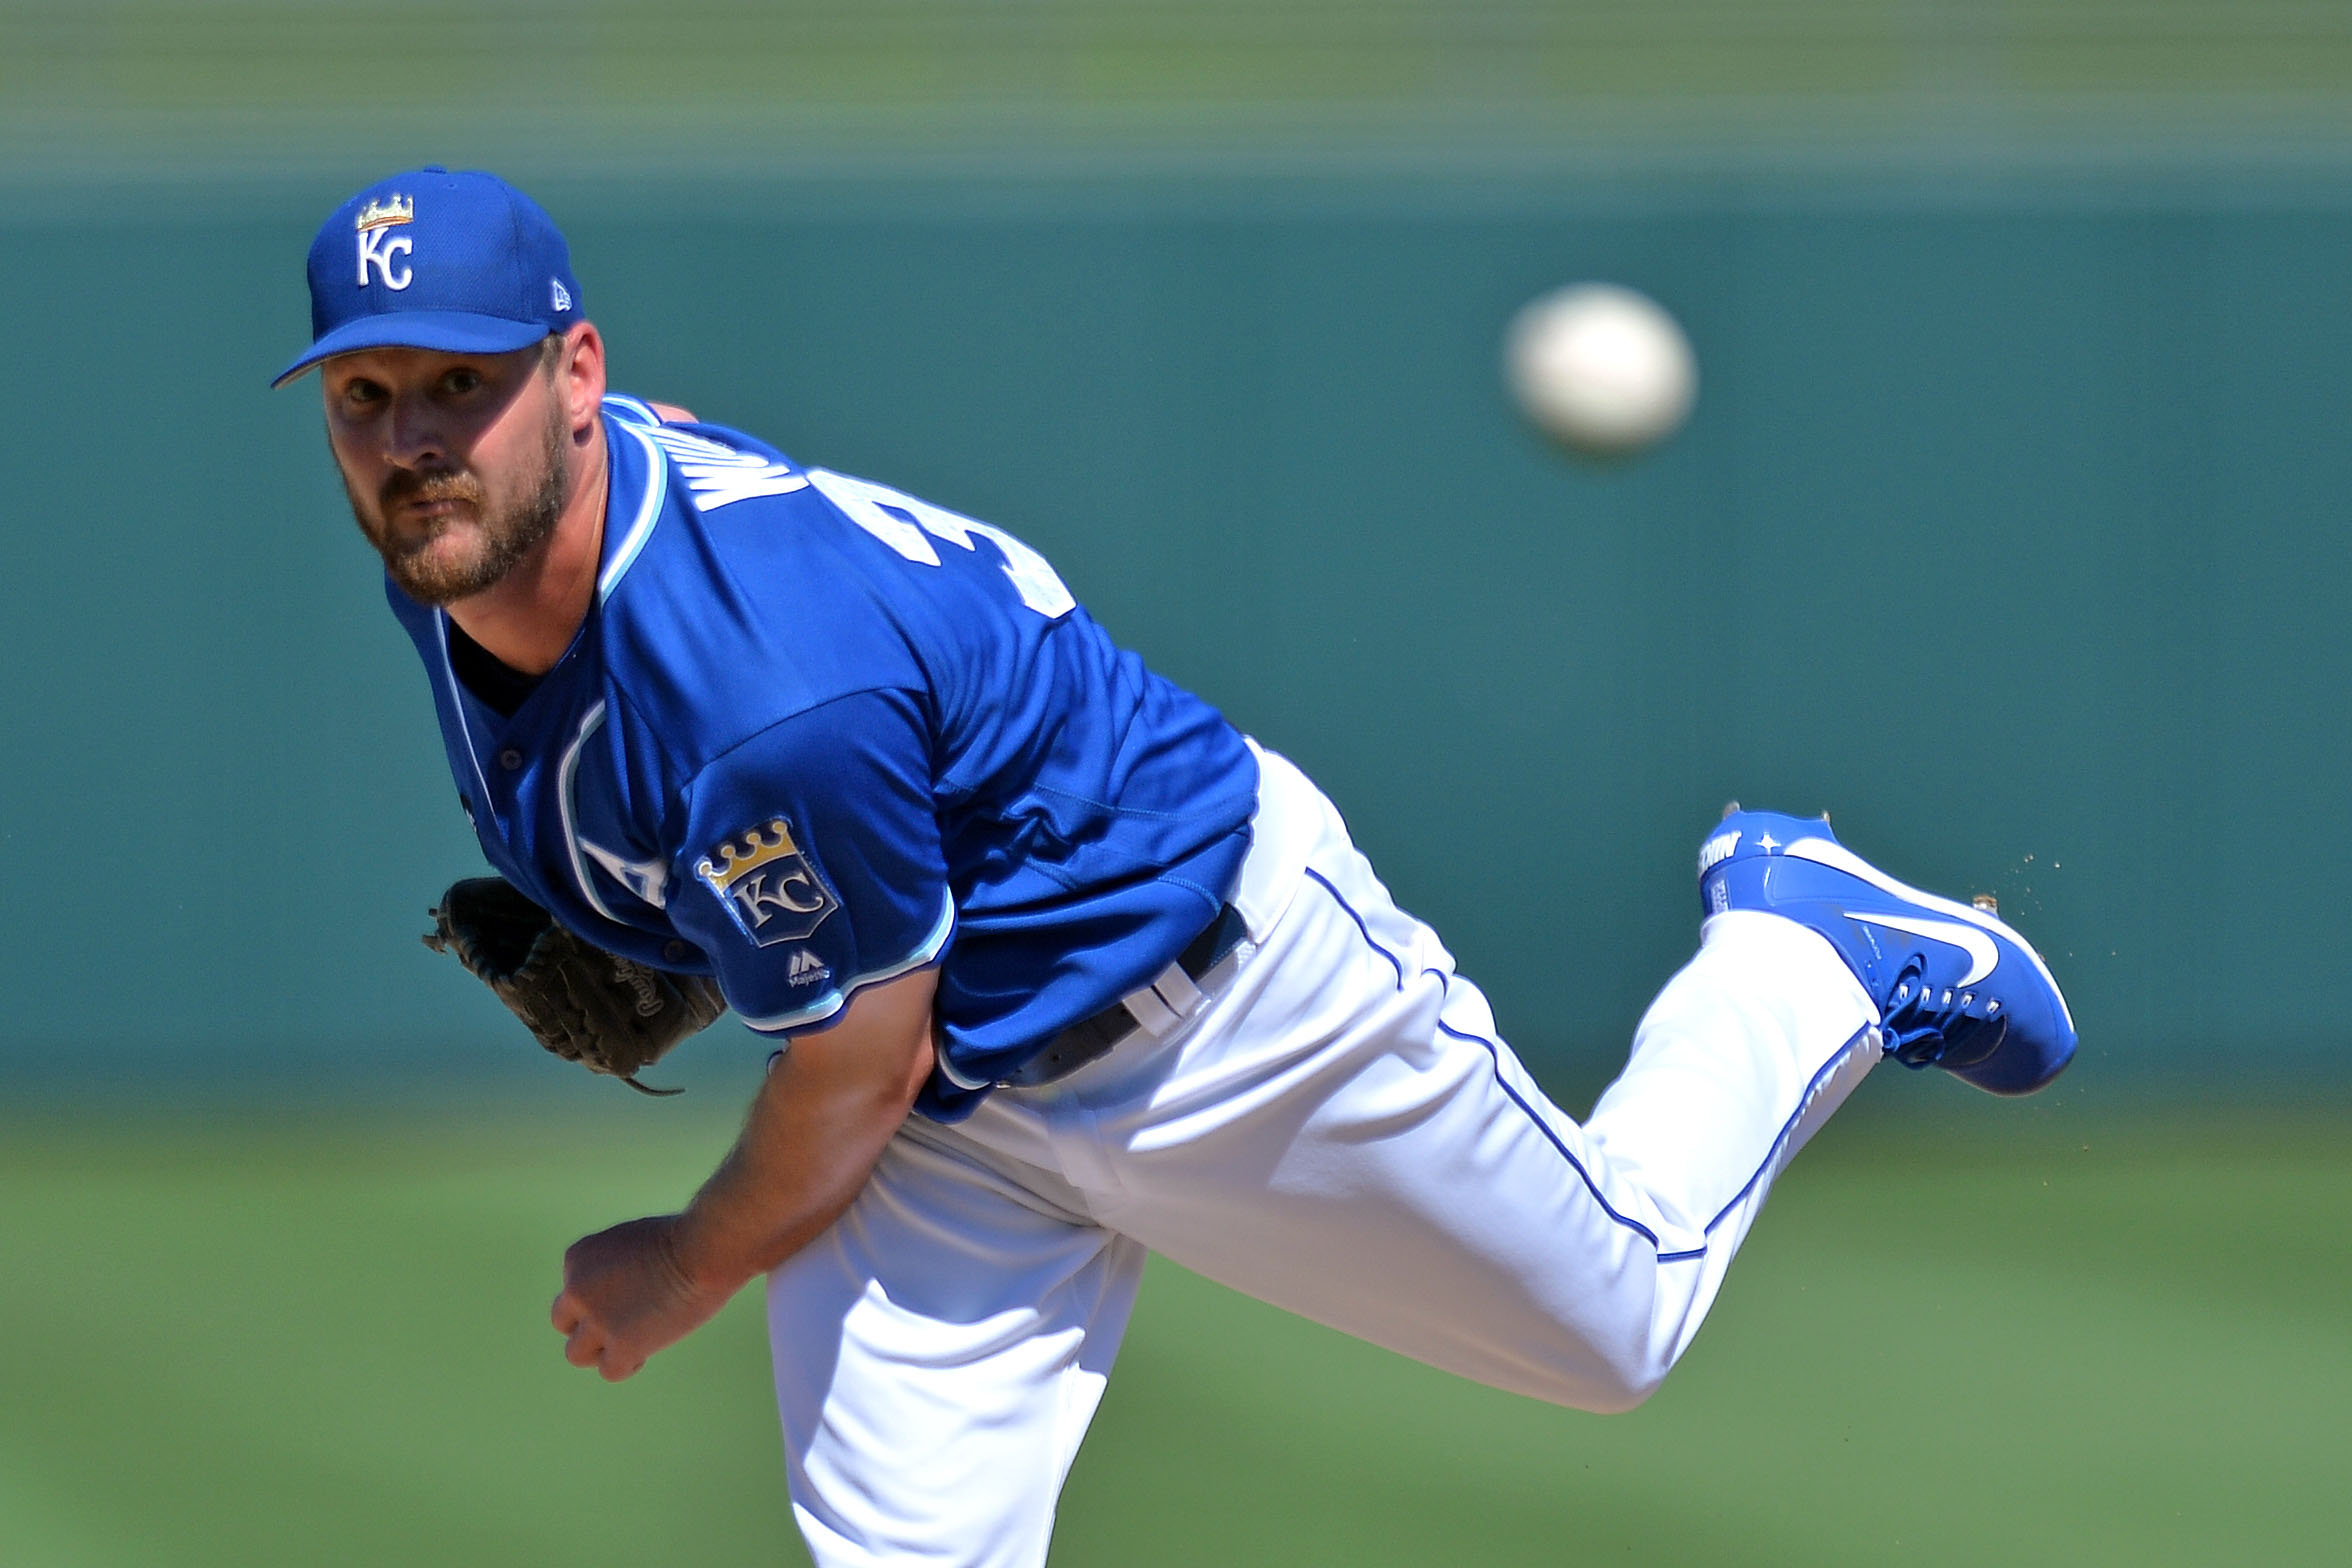 The KC Royals and their Bullpen Full of Starting Pitchers